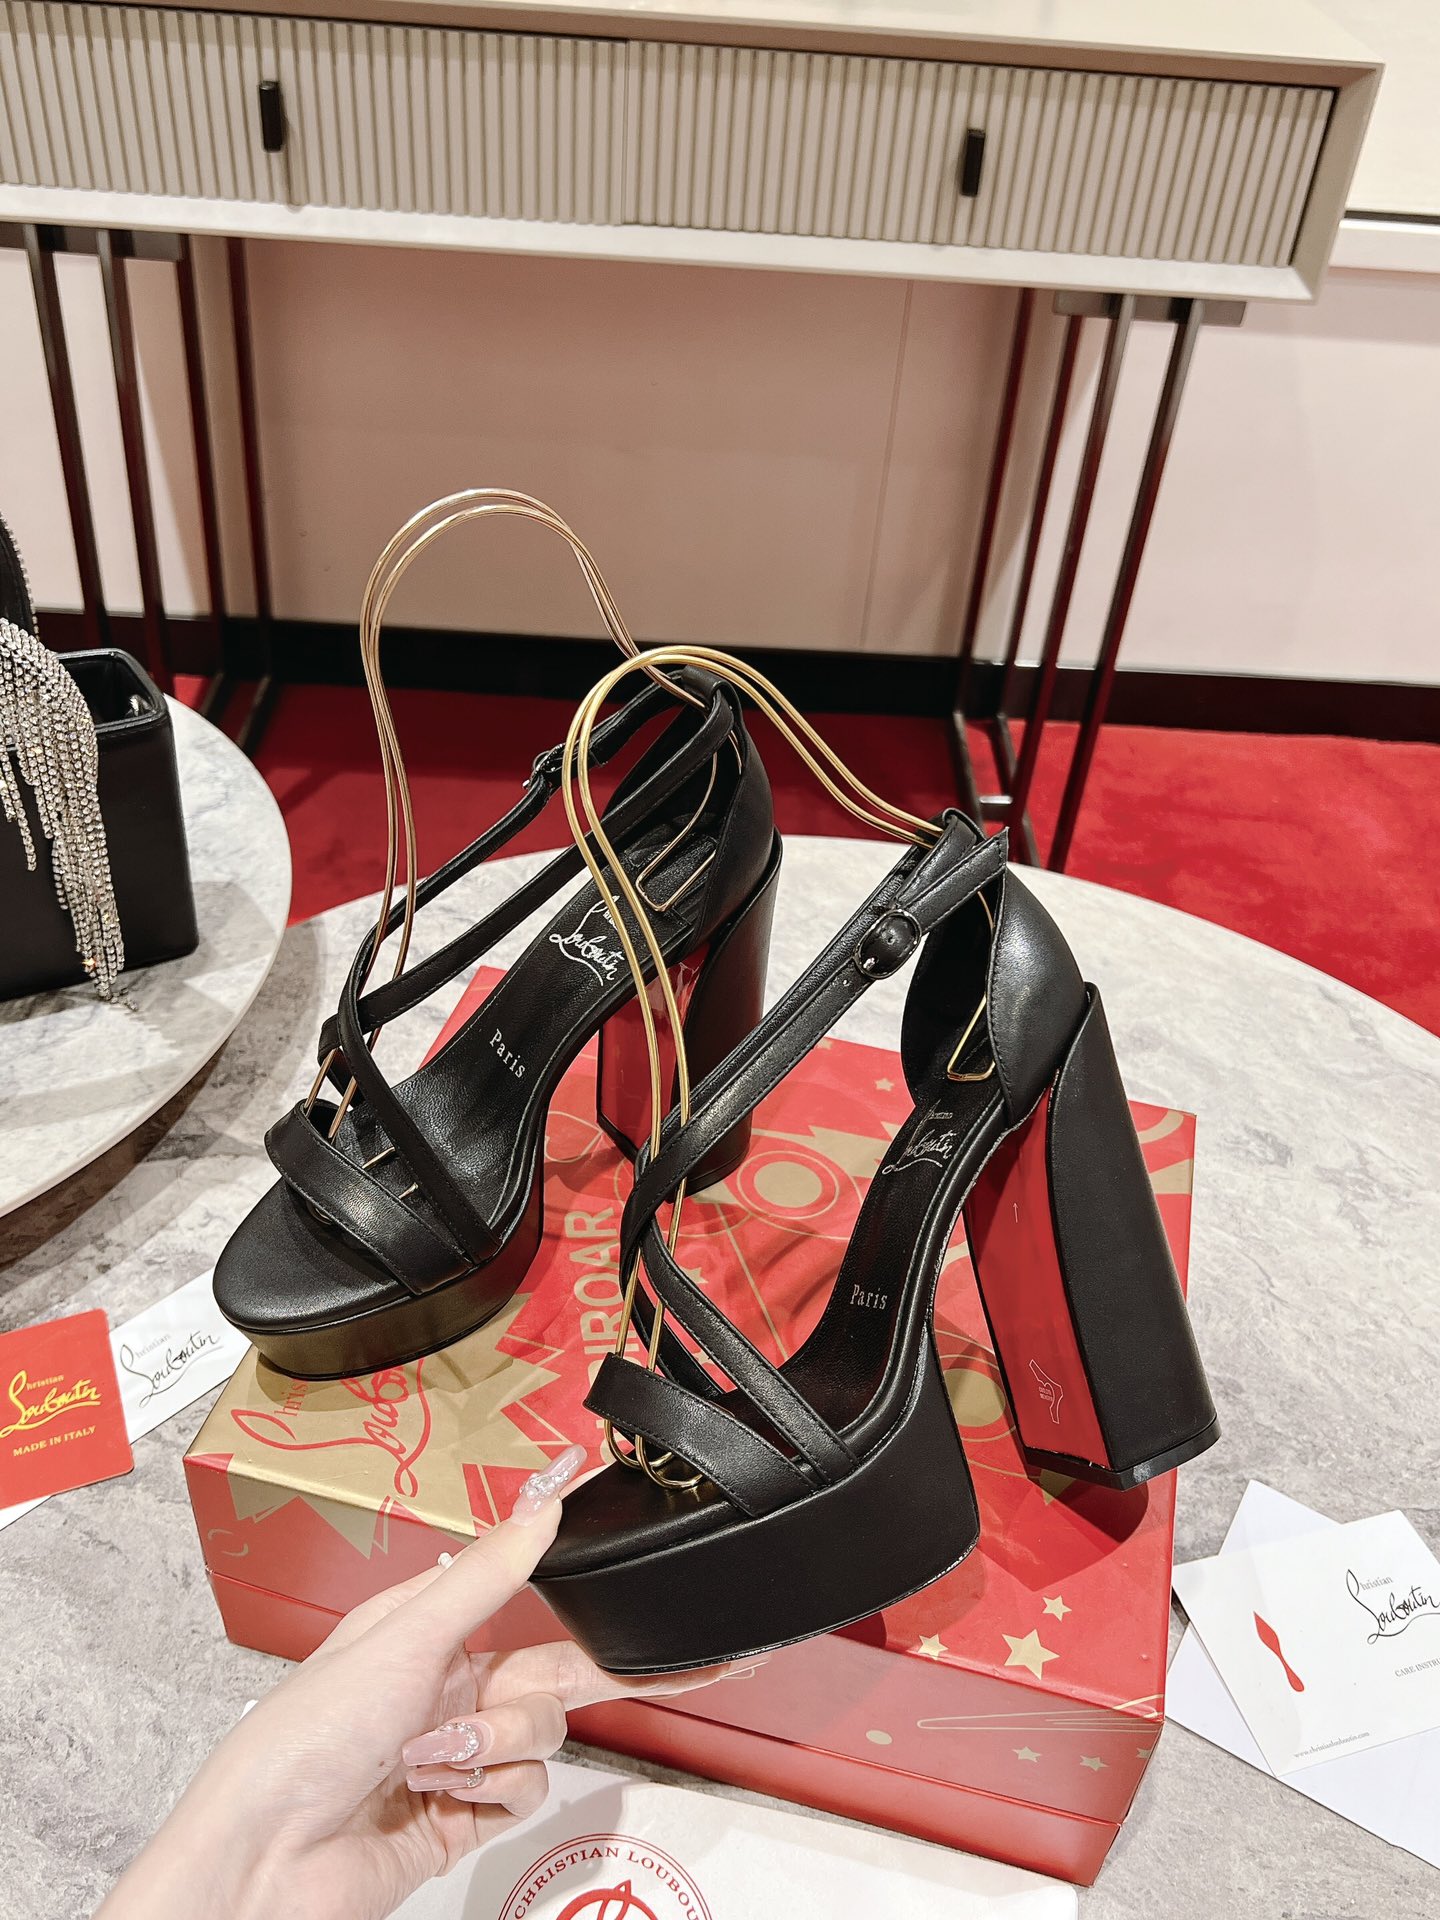 Christian Louboutin Shoes High Heel Pumps Sandals Black Calfskin Cowhide Patent Leather